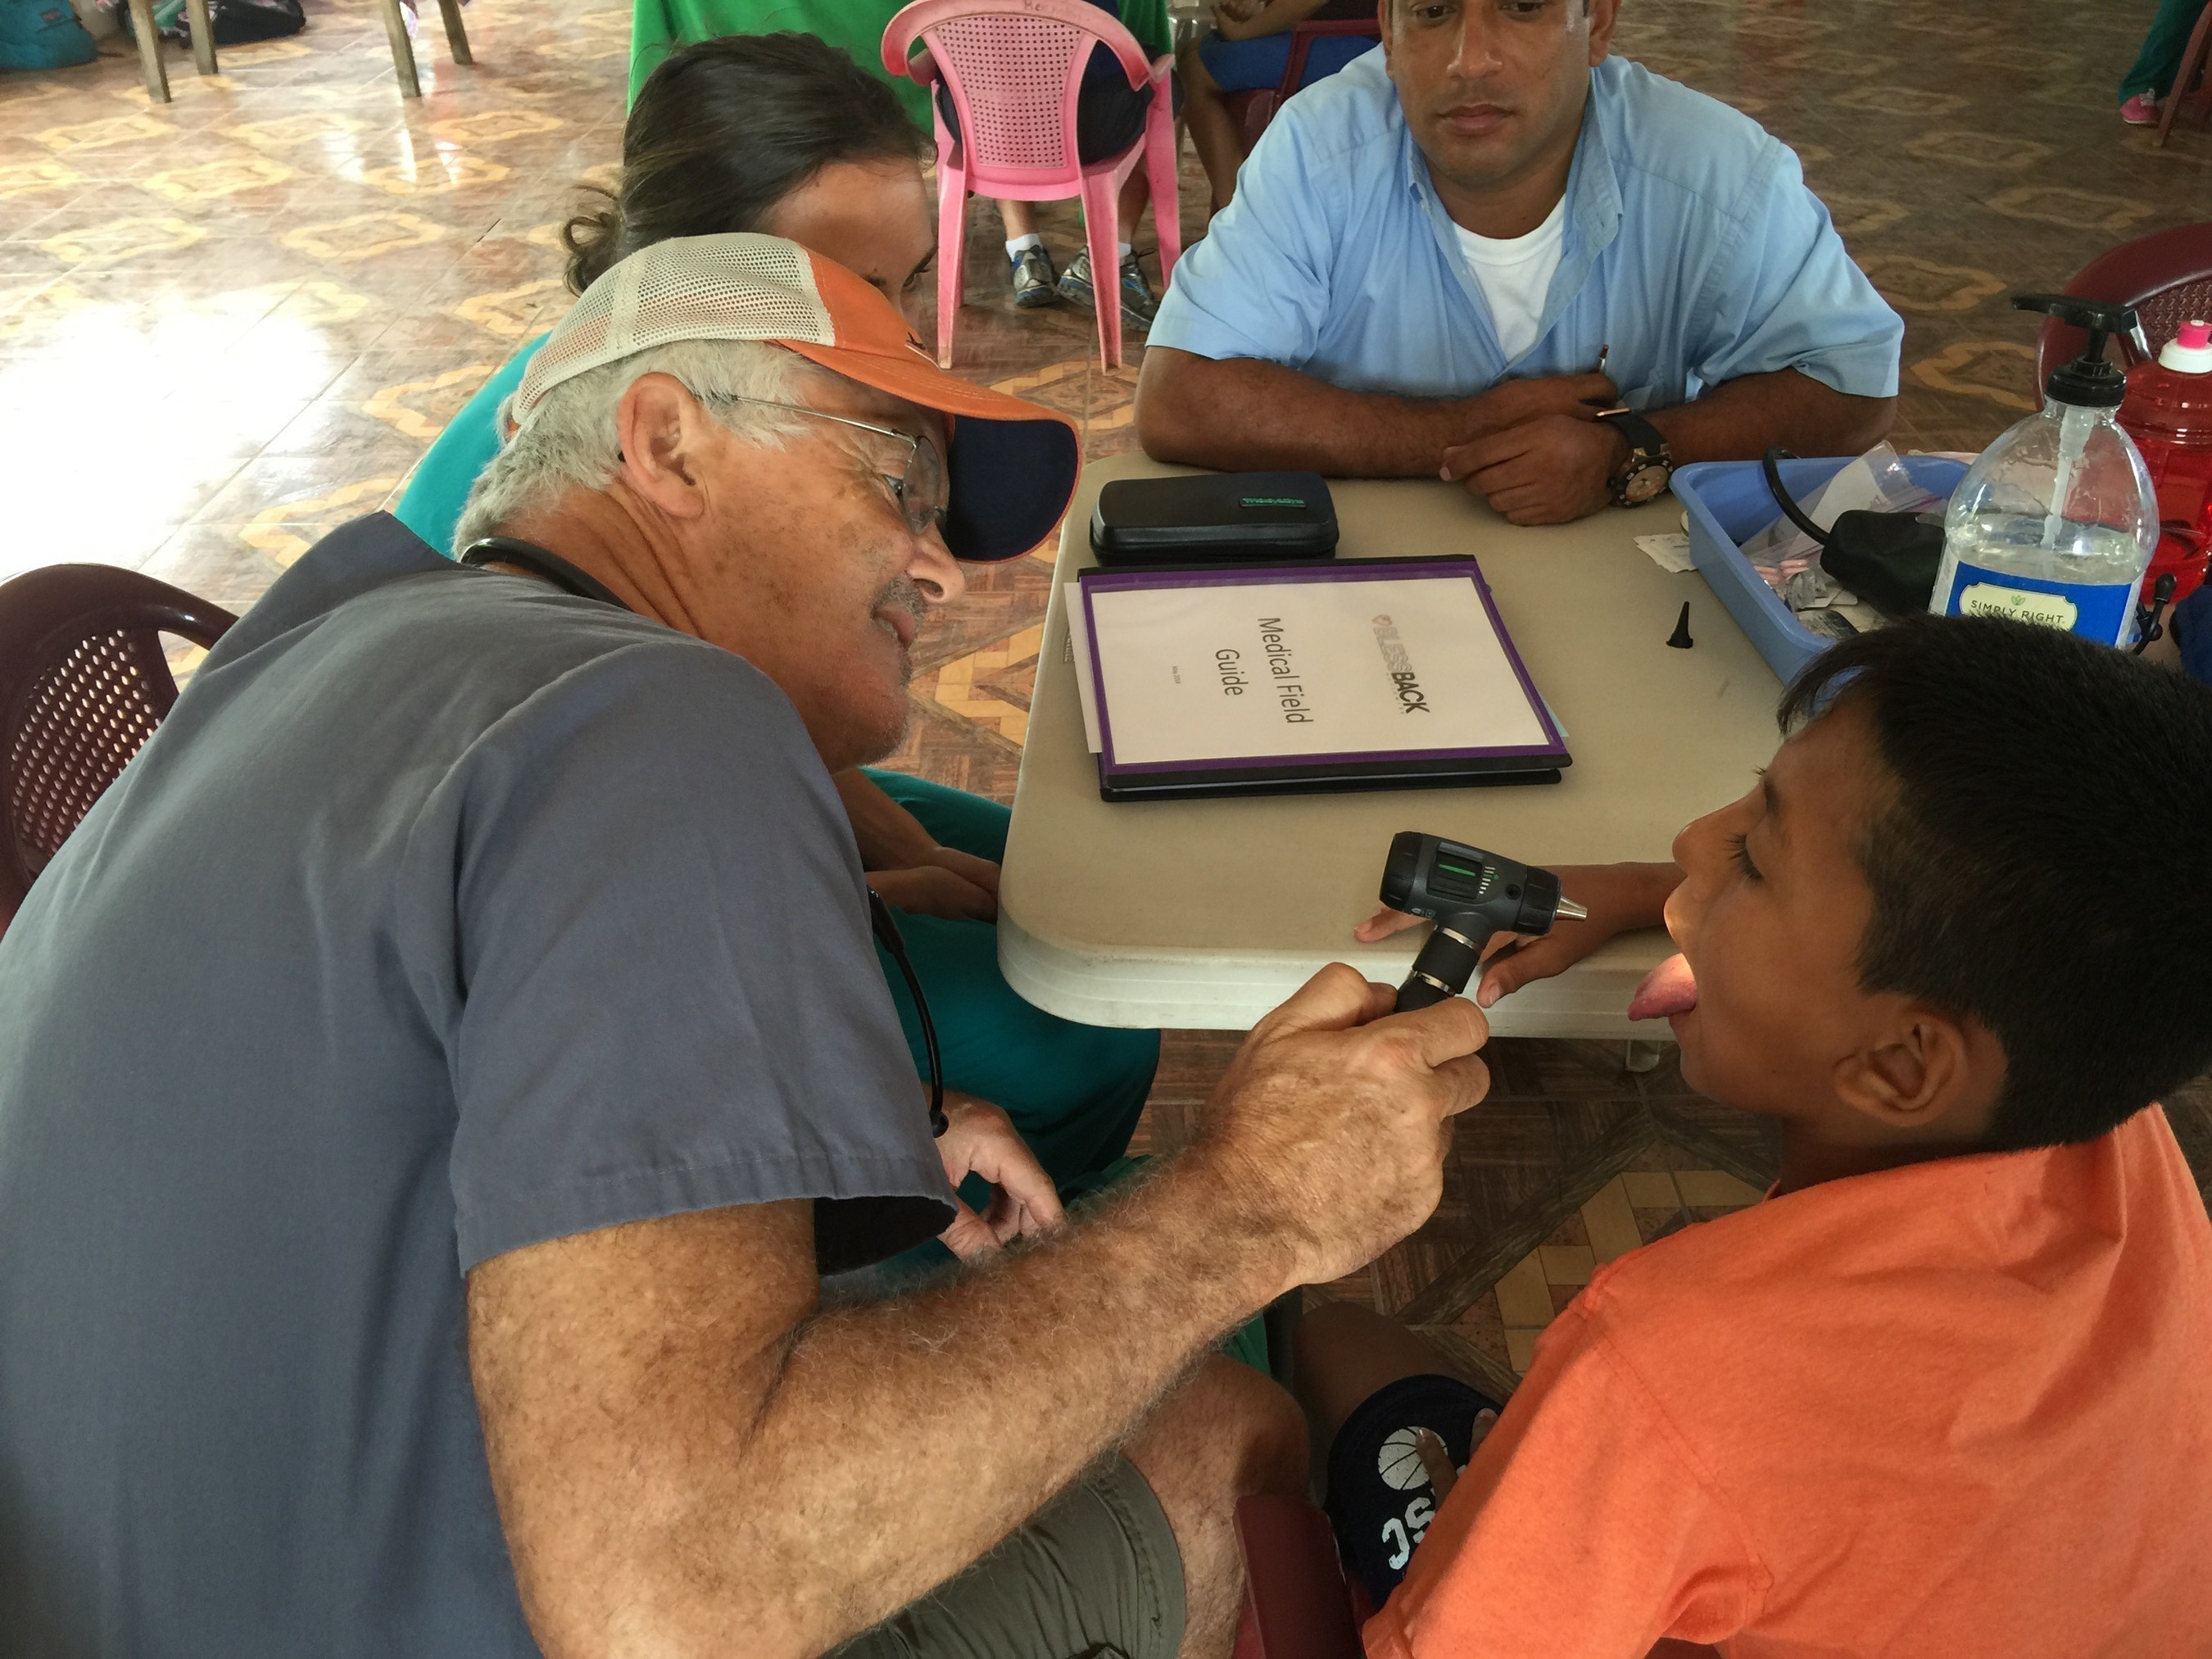 Dr. Roy Blank evaluates a patient in Nicaragua.